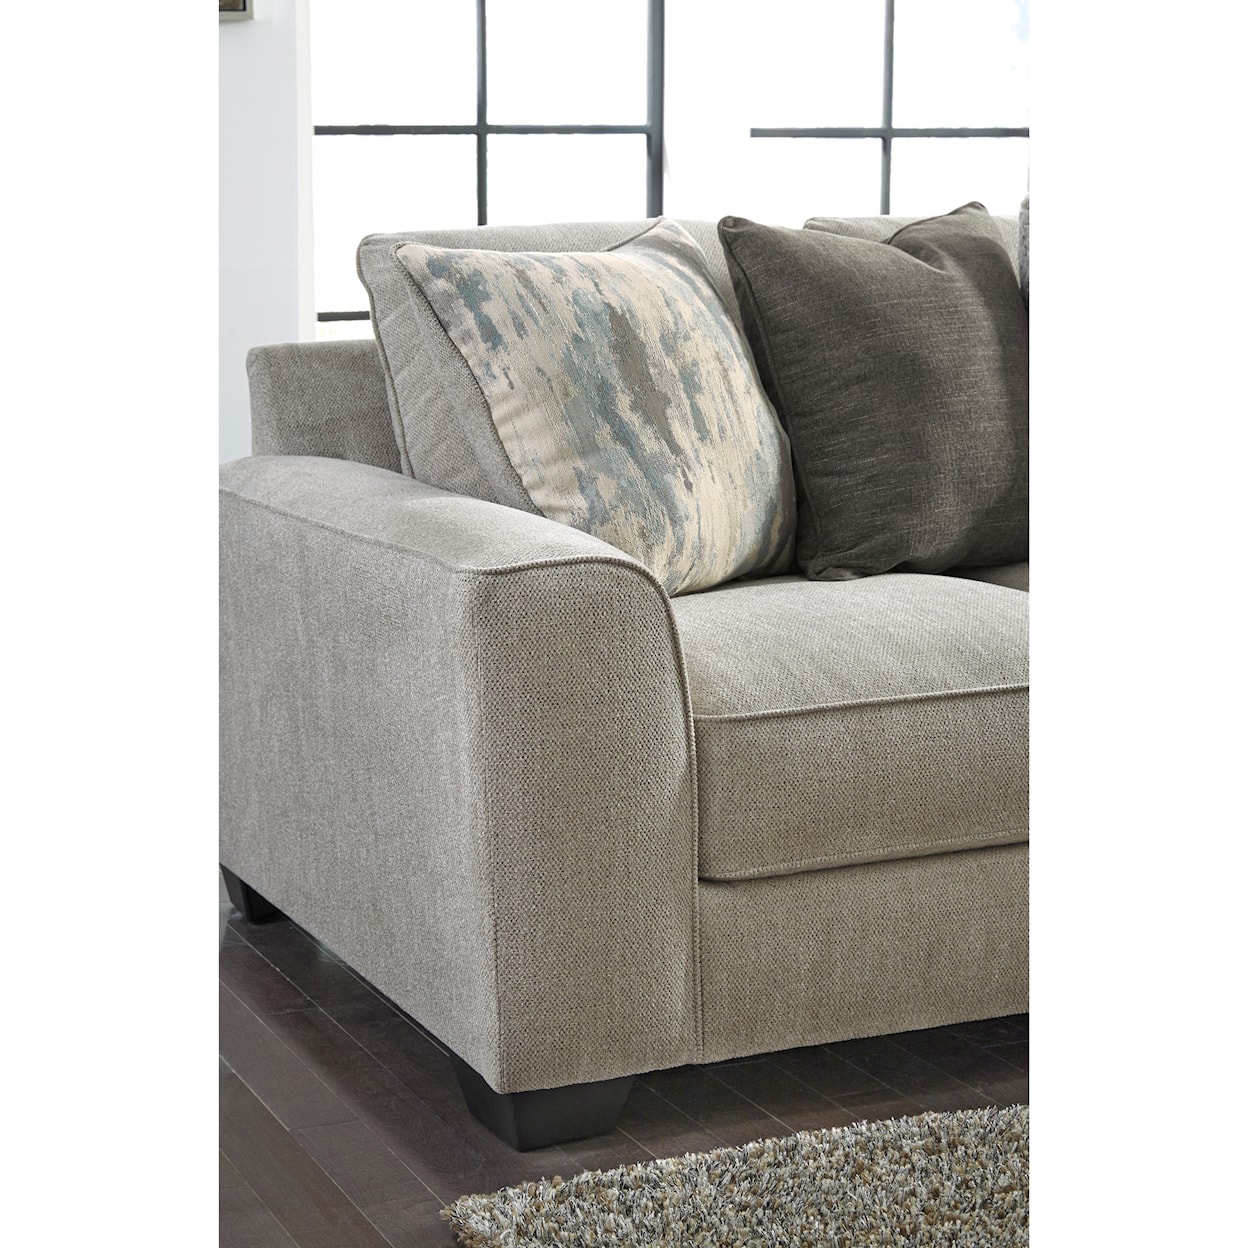 Ashley Ardsley 4-Piece Sectional with Right Chaise